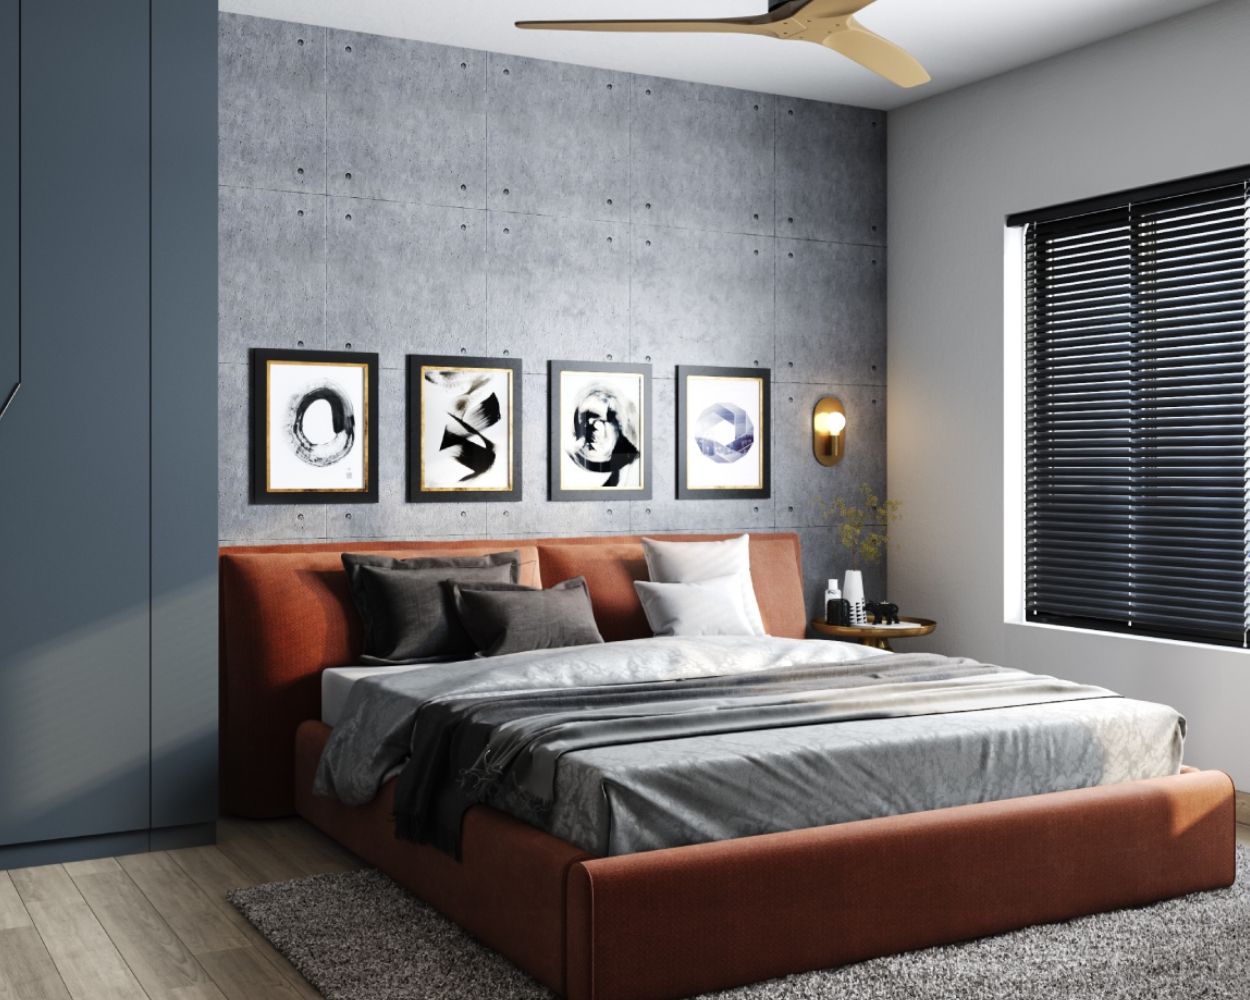 Industrial Bedroom Wall Design With Grey Concrete Square Panels